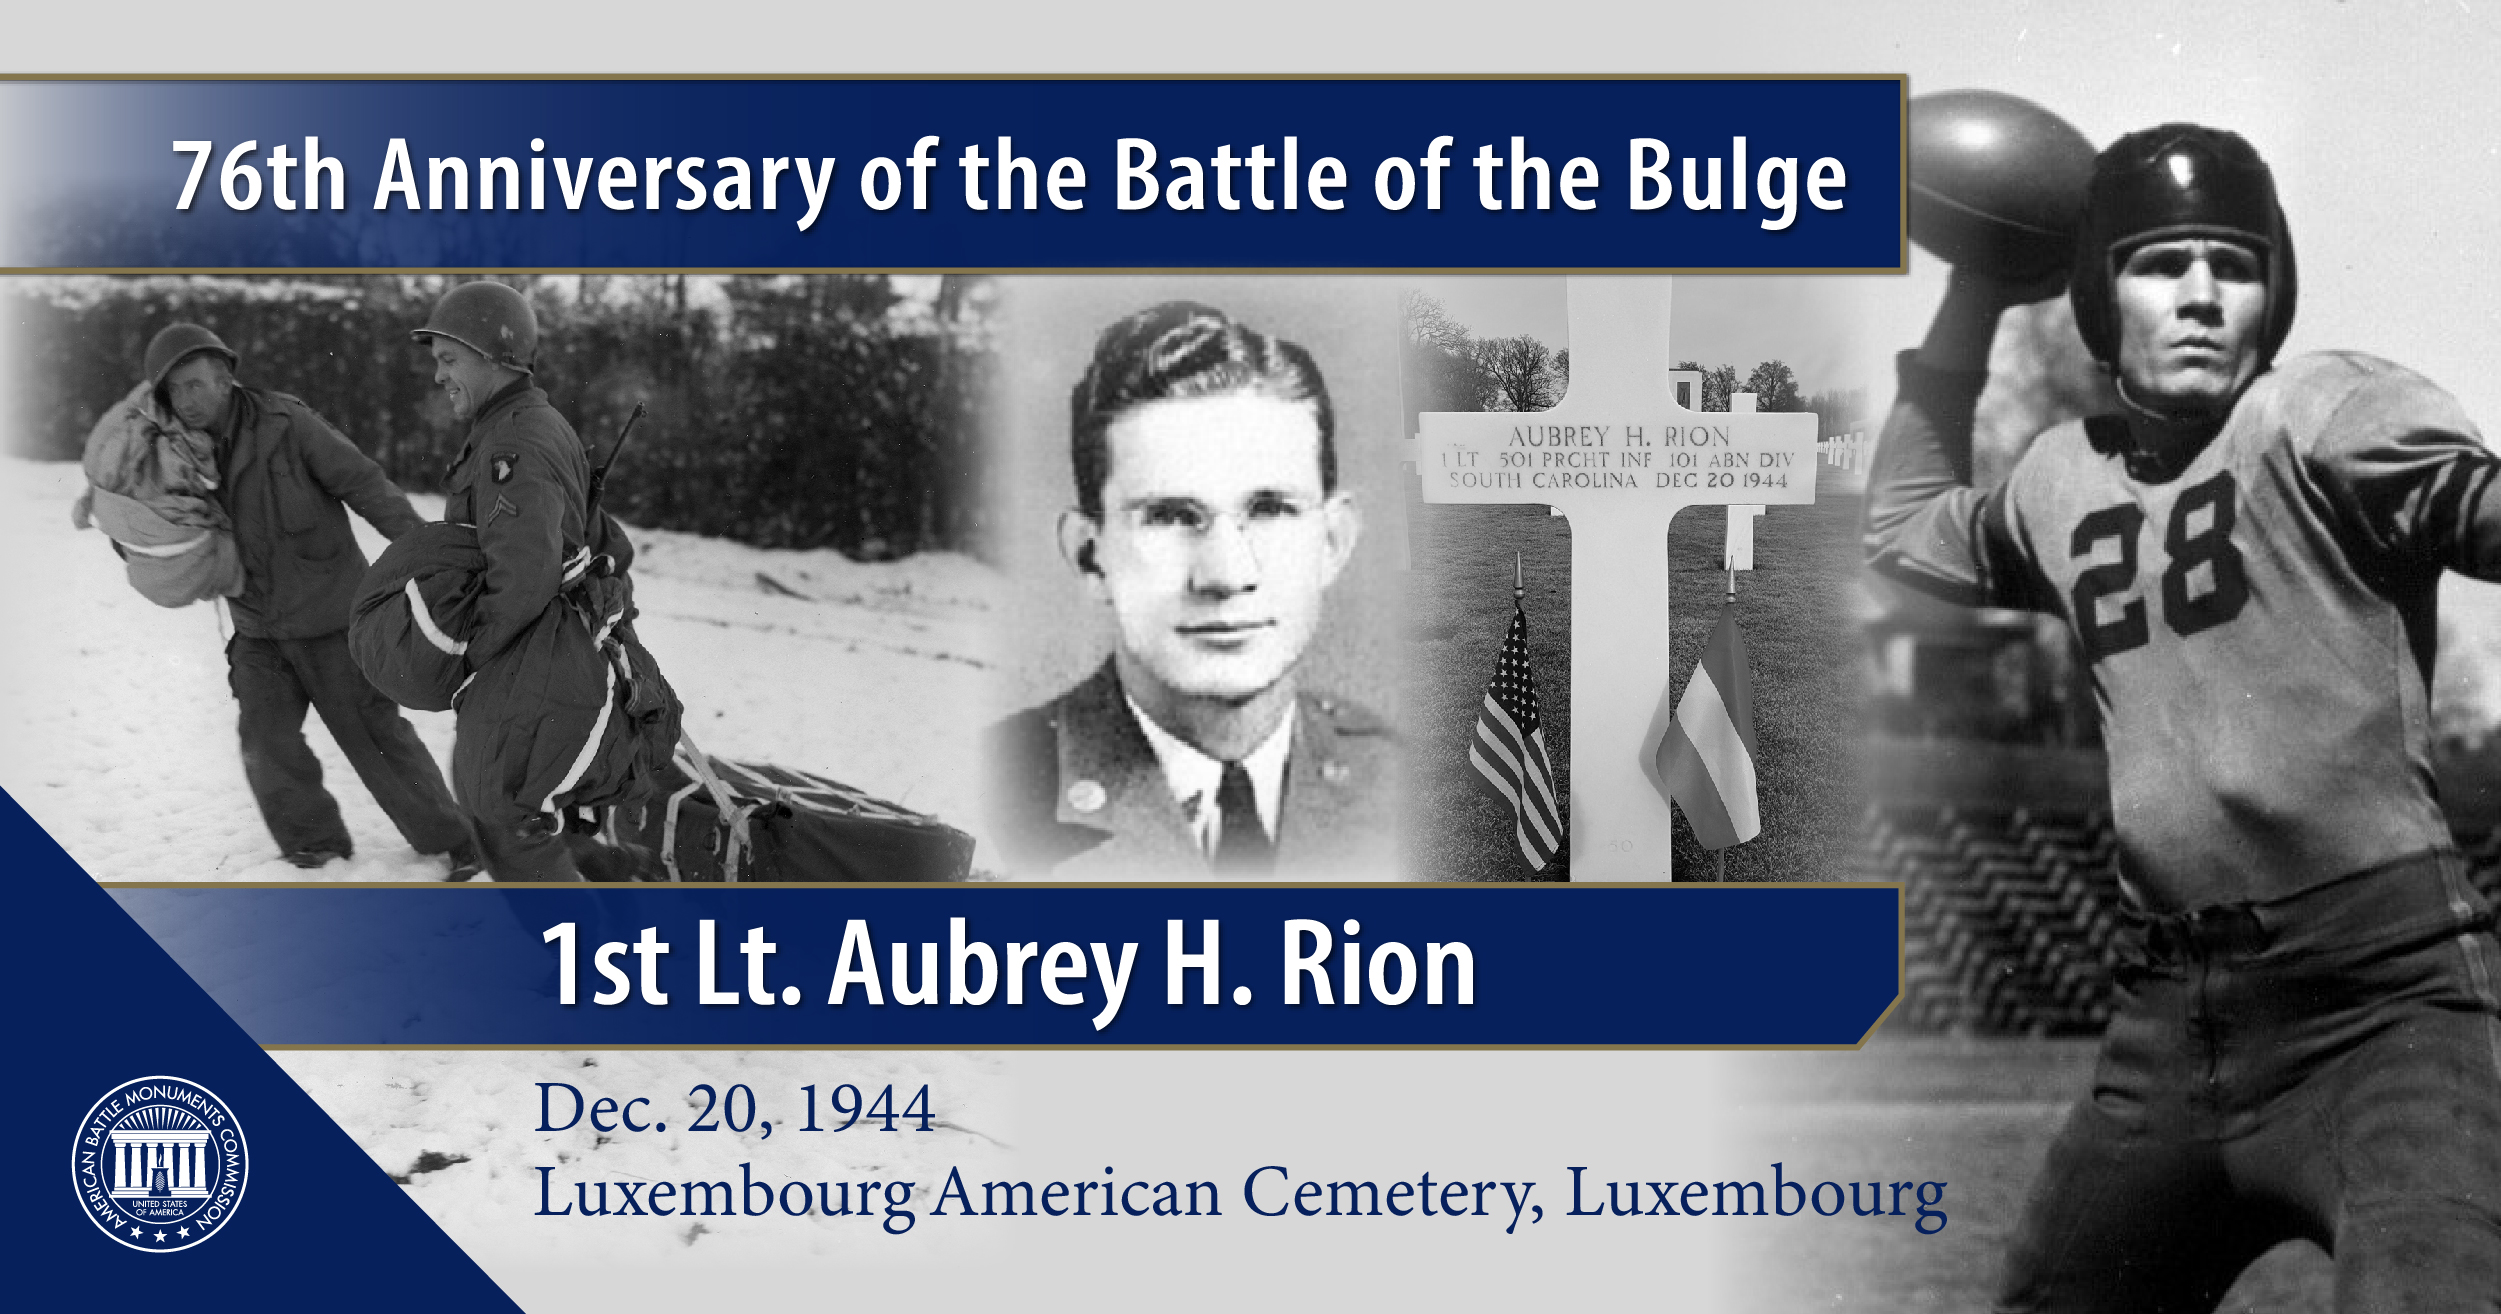 1st Lt. Aubrey H. Rion is buried in Luxembourg American Cemetery